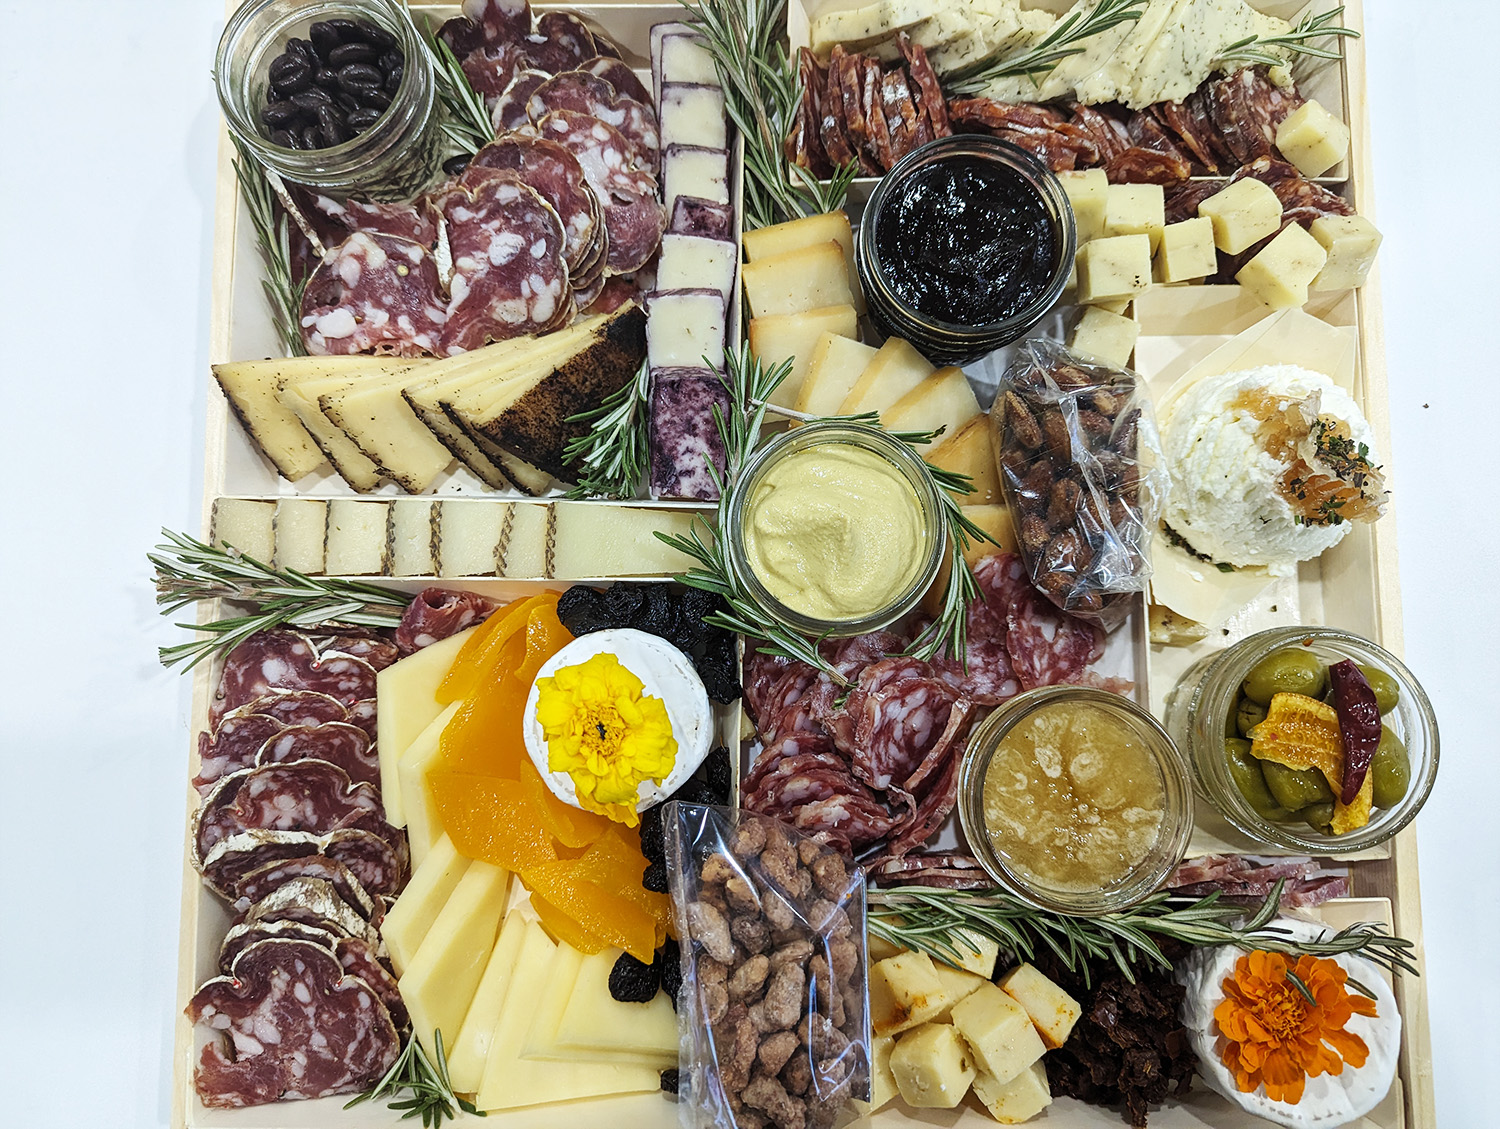 Cheese and Charcuterie Board Scottsdale Delivery - Kale Chef Service